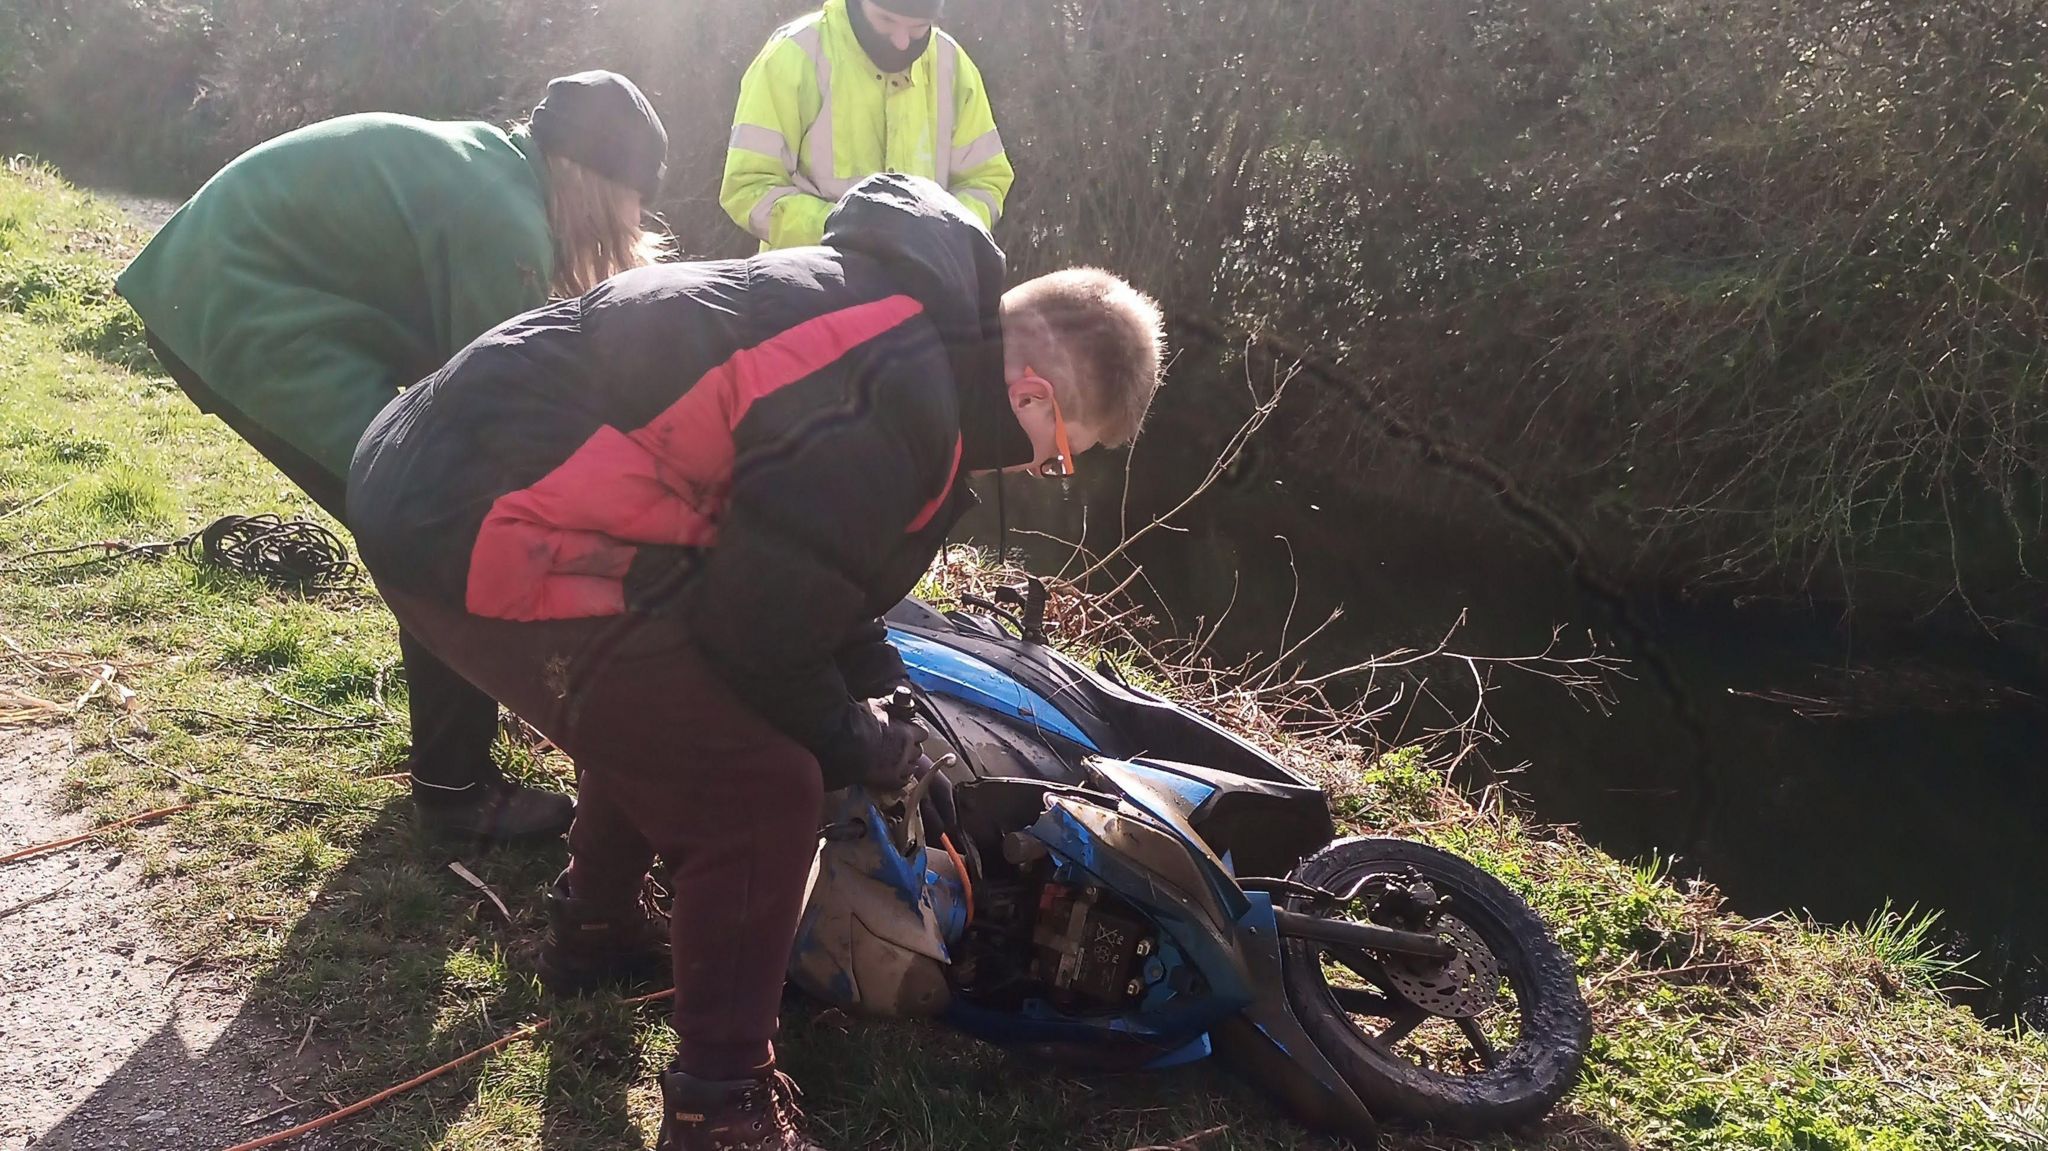 Motorcycle pulled from drain